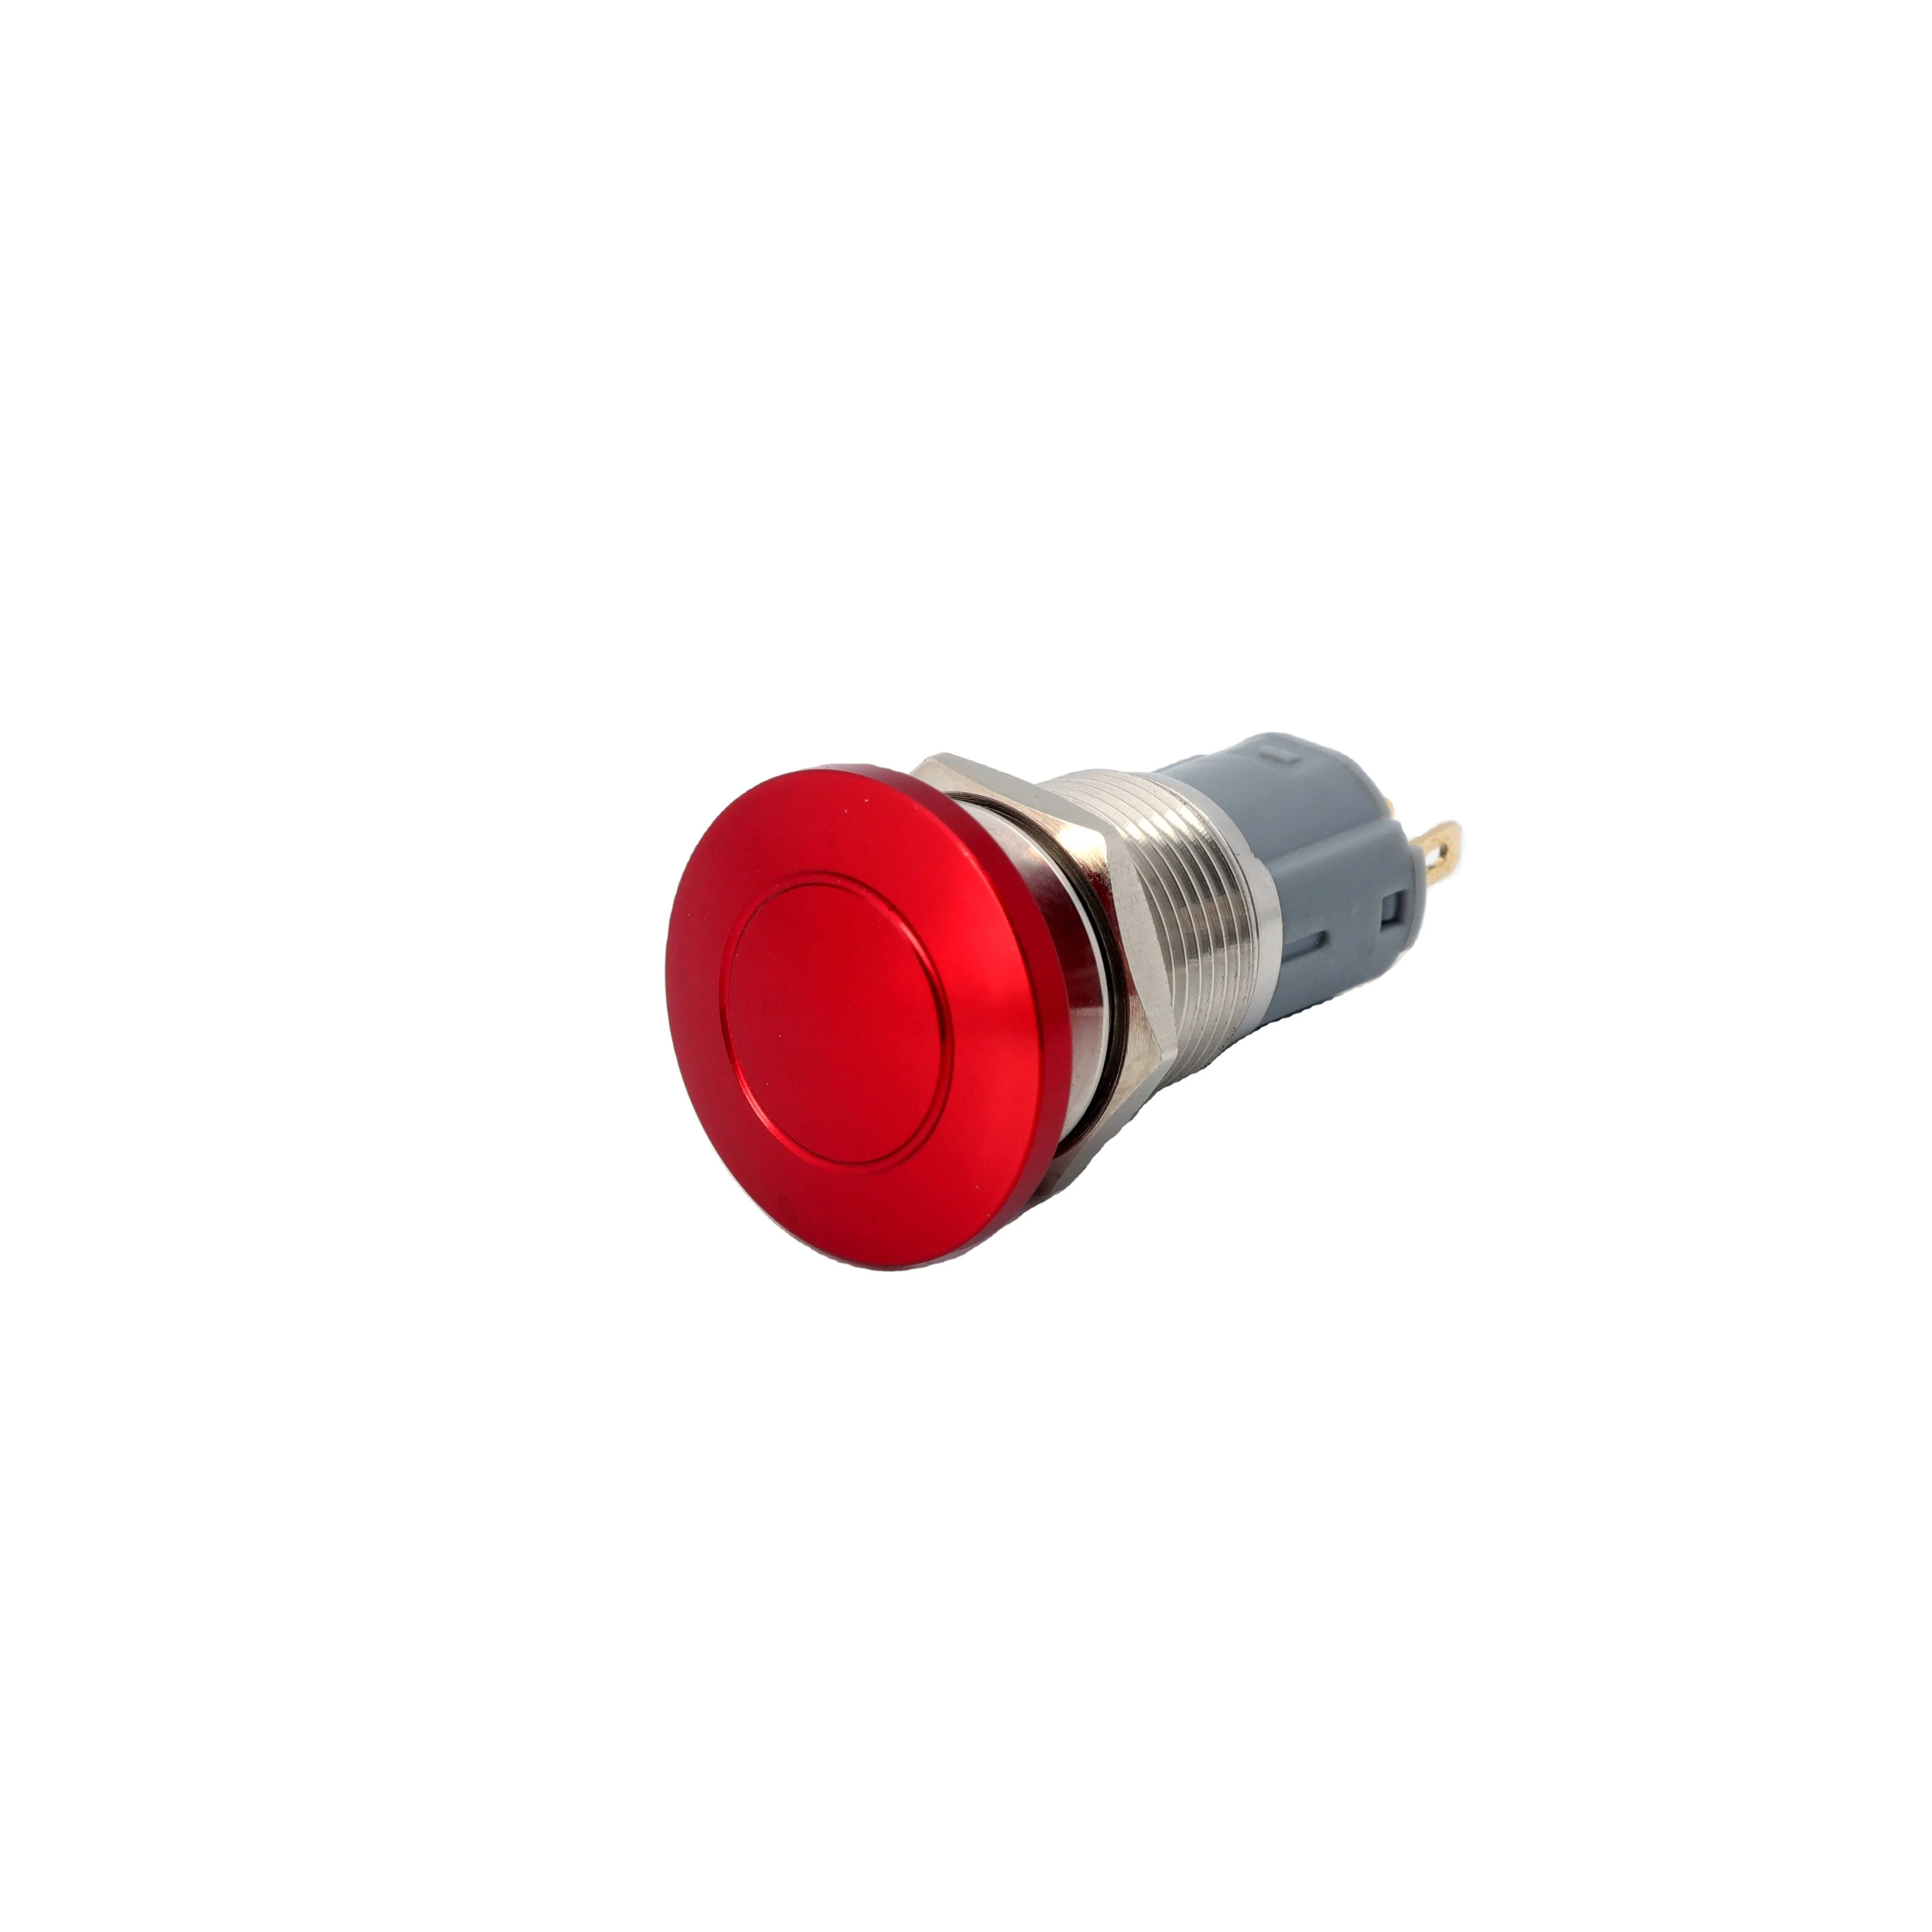 10mm 12v momentary waterproof switch mini push button switch for game machine